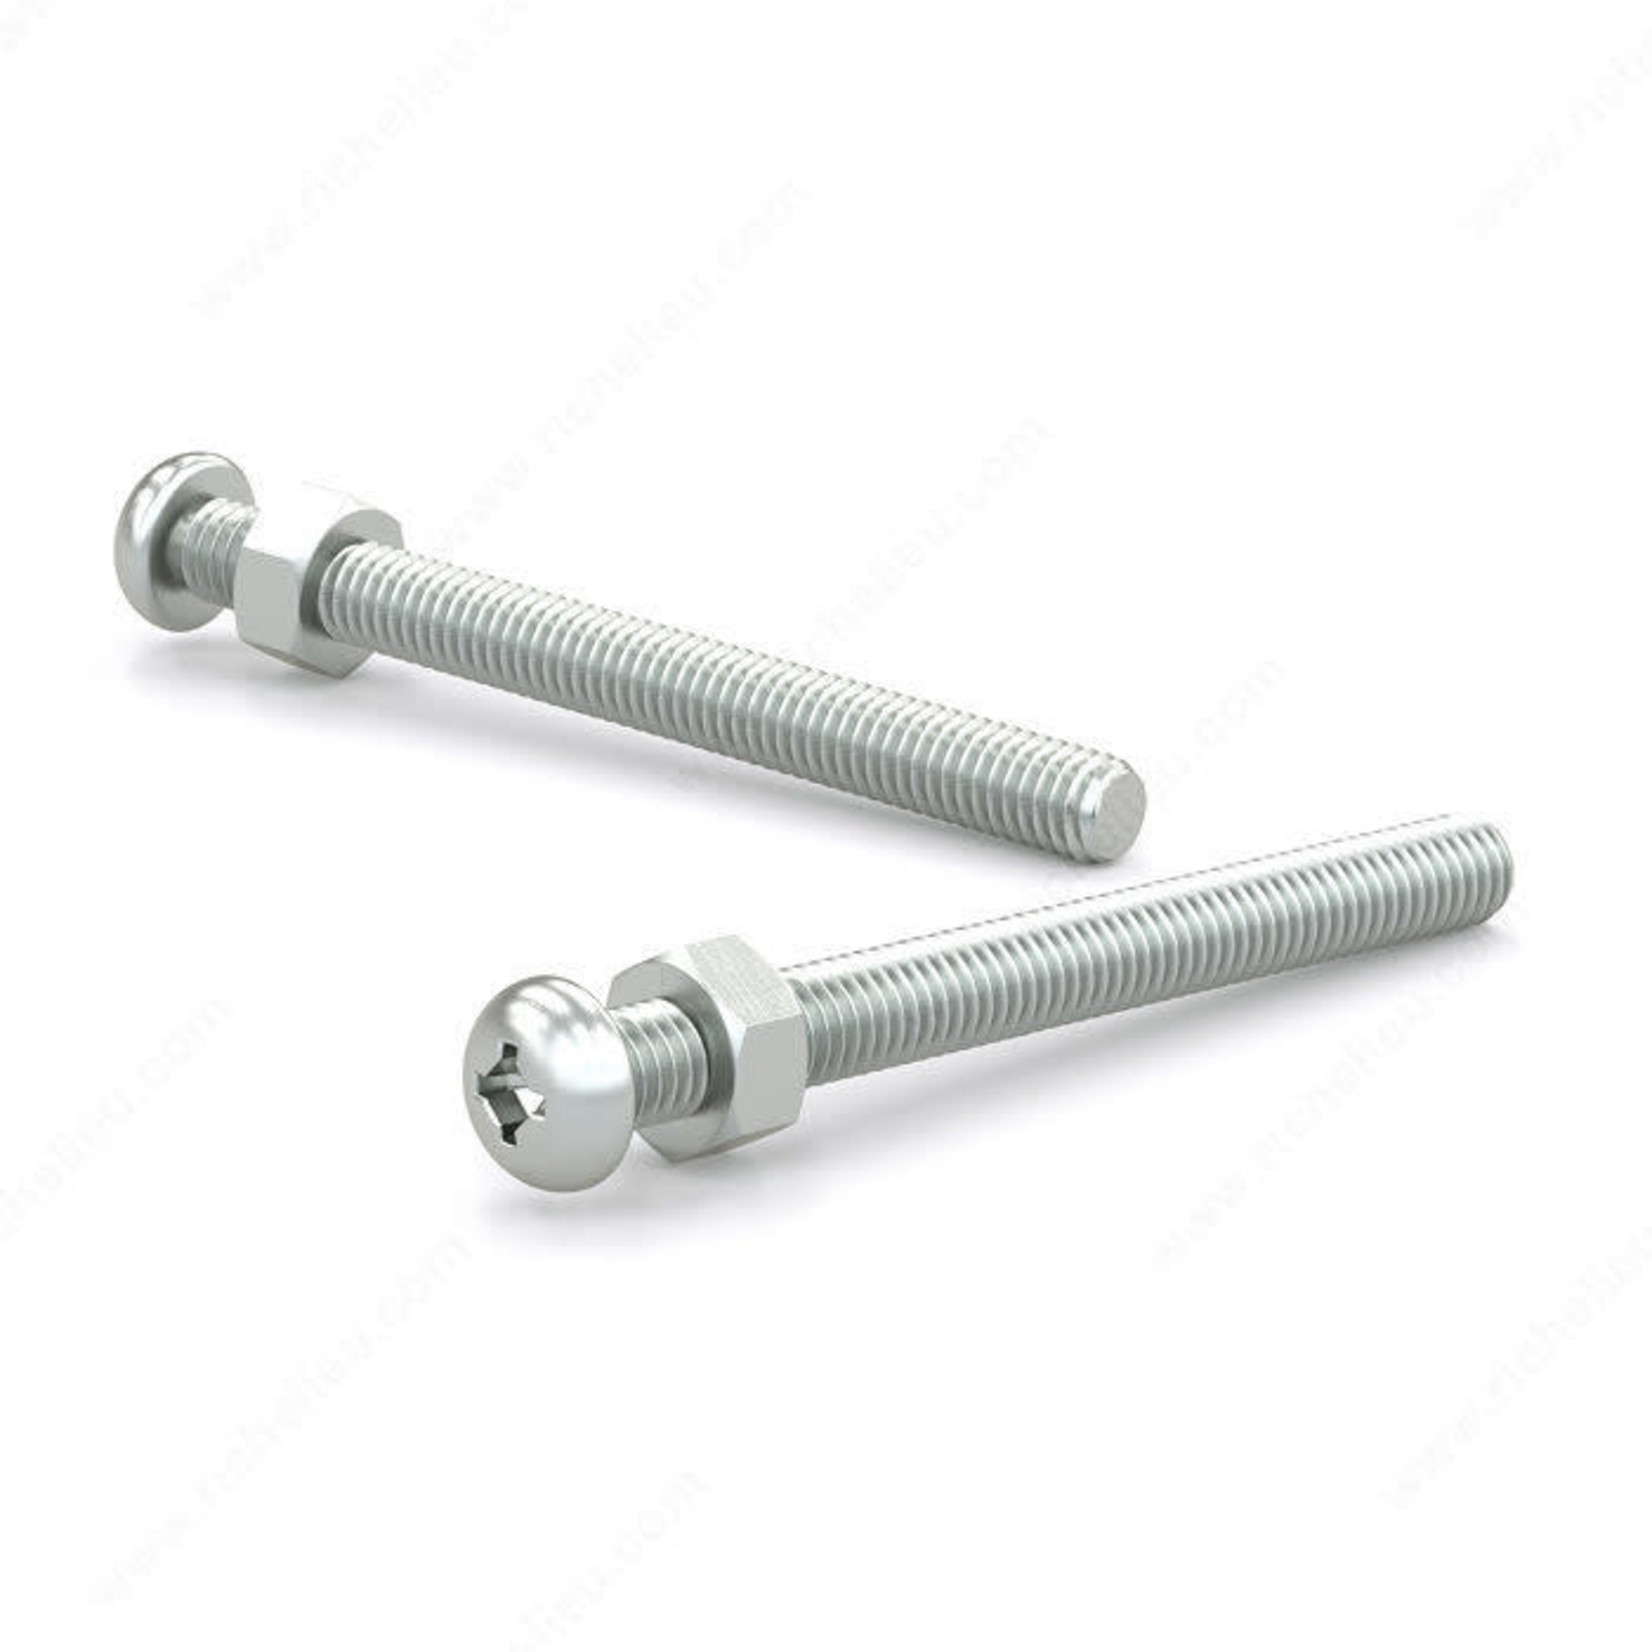 RELIABLE MACHINE SCREW WITH NUT, PAN HEAD, 1/4" 1/2IN, 8PK BLISTER